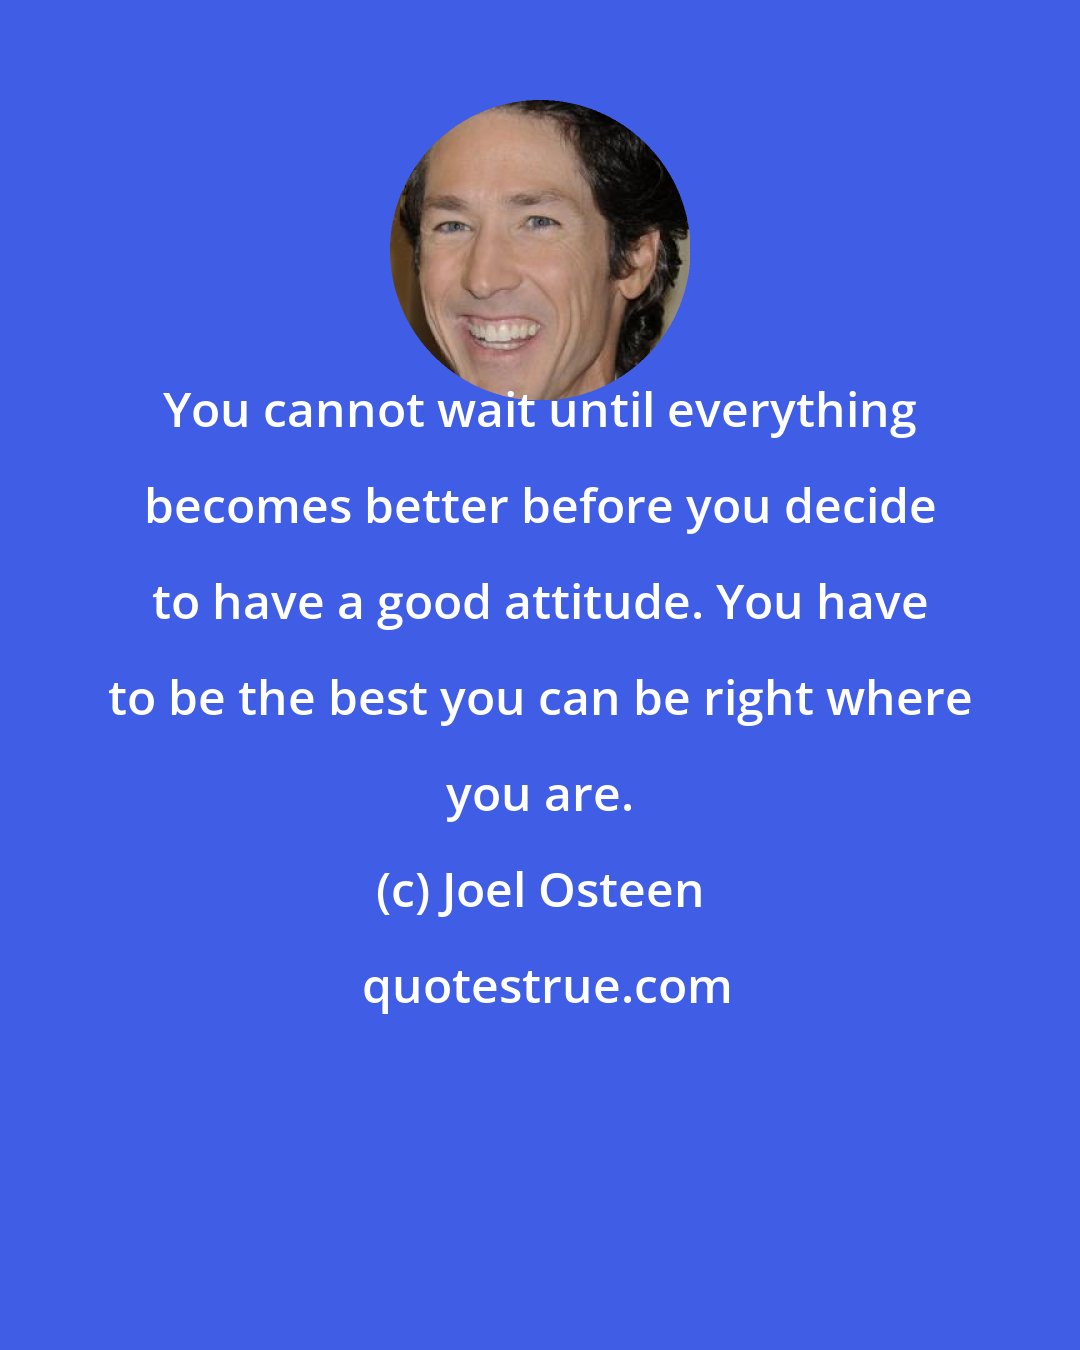 Joel Osteen: You cannot wait until everything becomes better before you decide to have a good attitude. You have to be the best you can be right where you are.